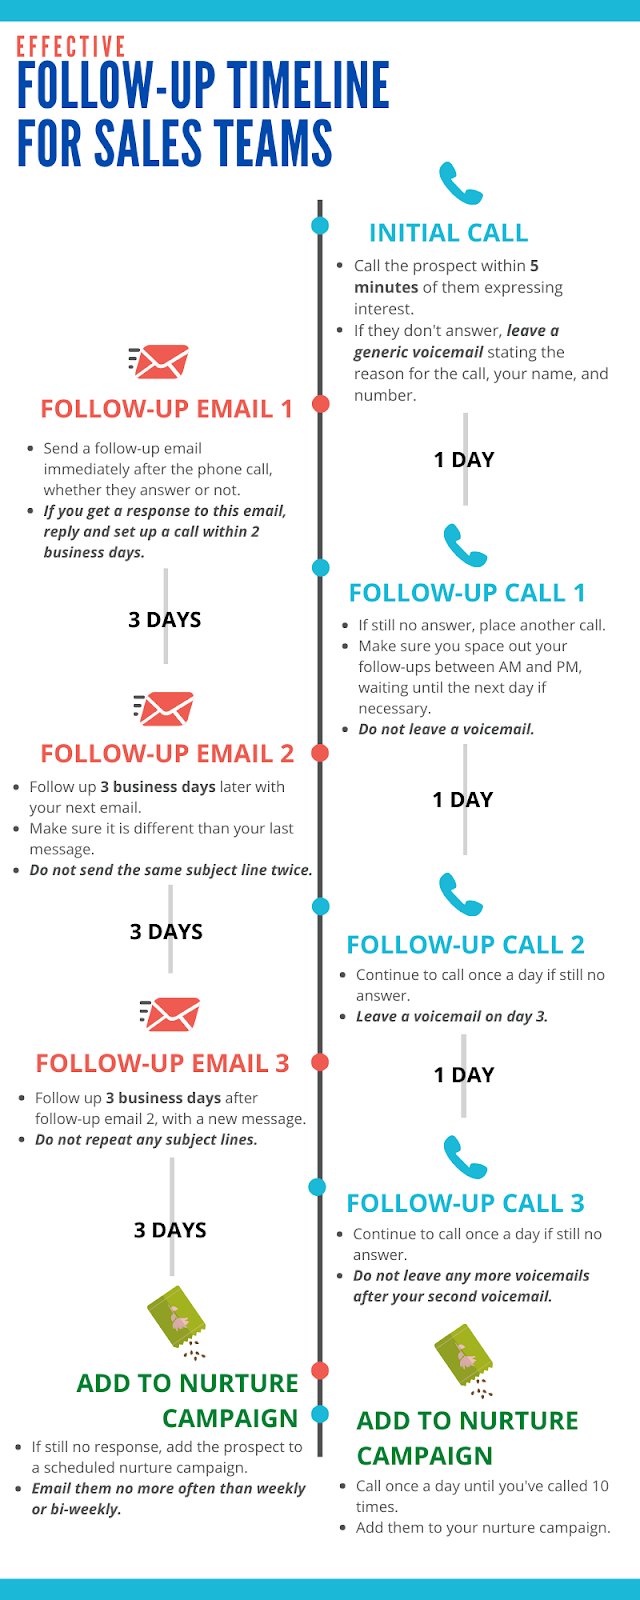 How To Write a Follow-up Email After No Response [10 Templates]